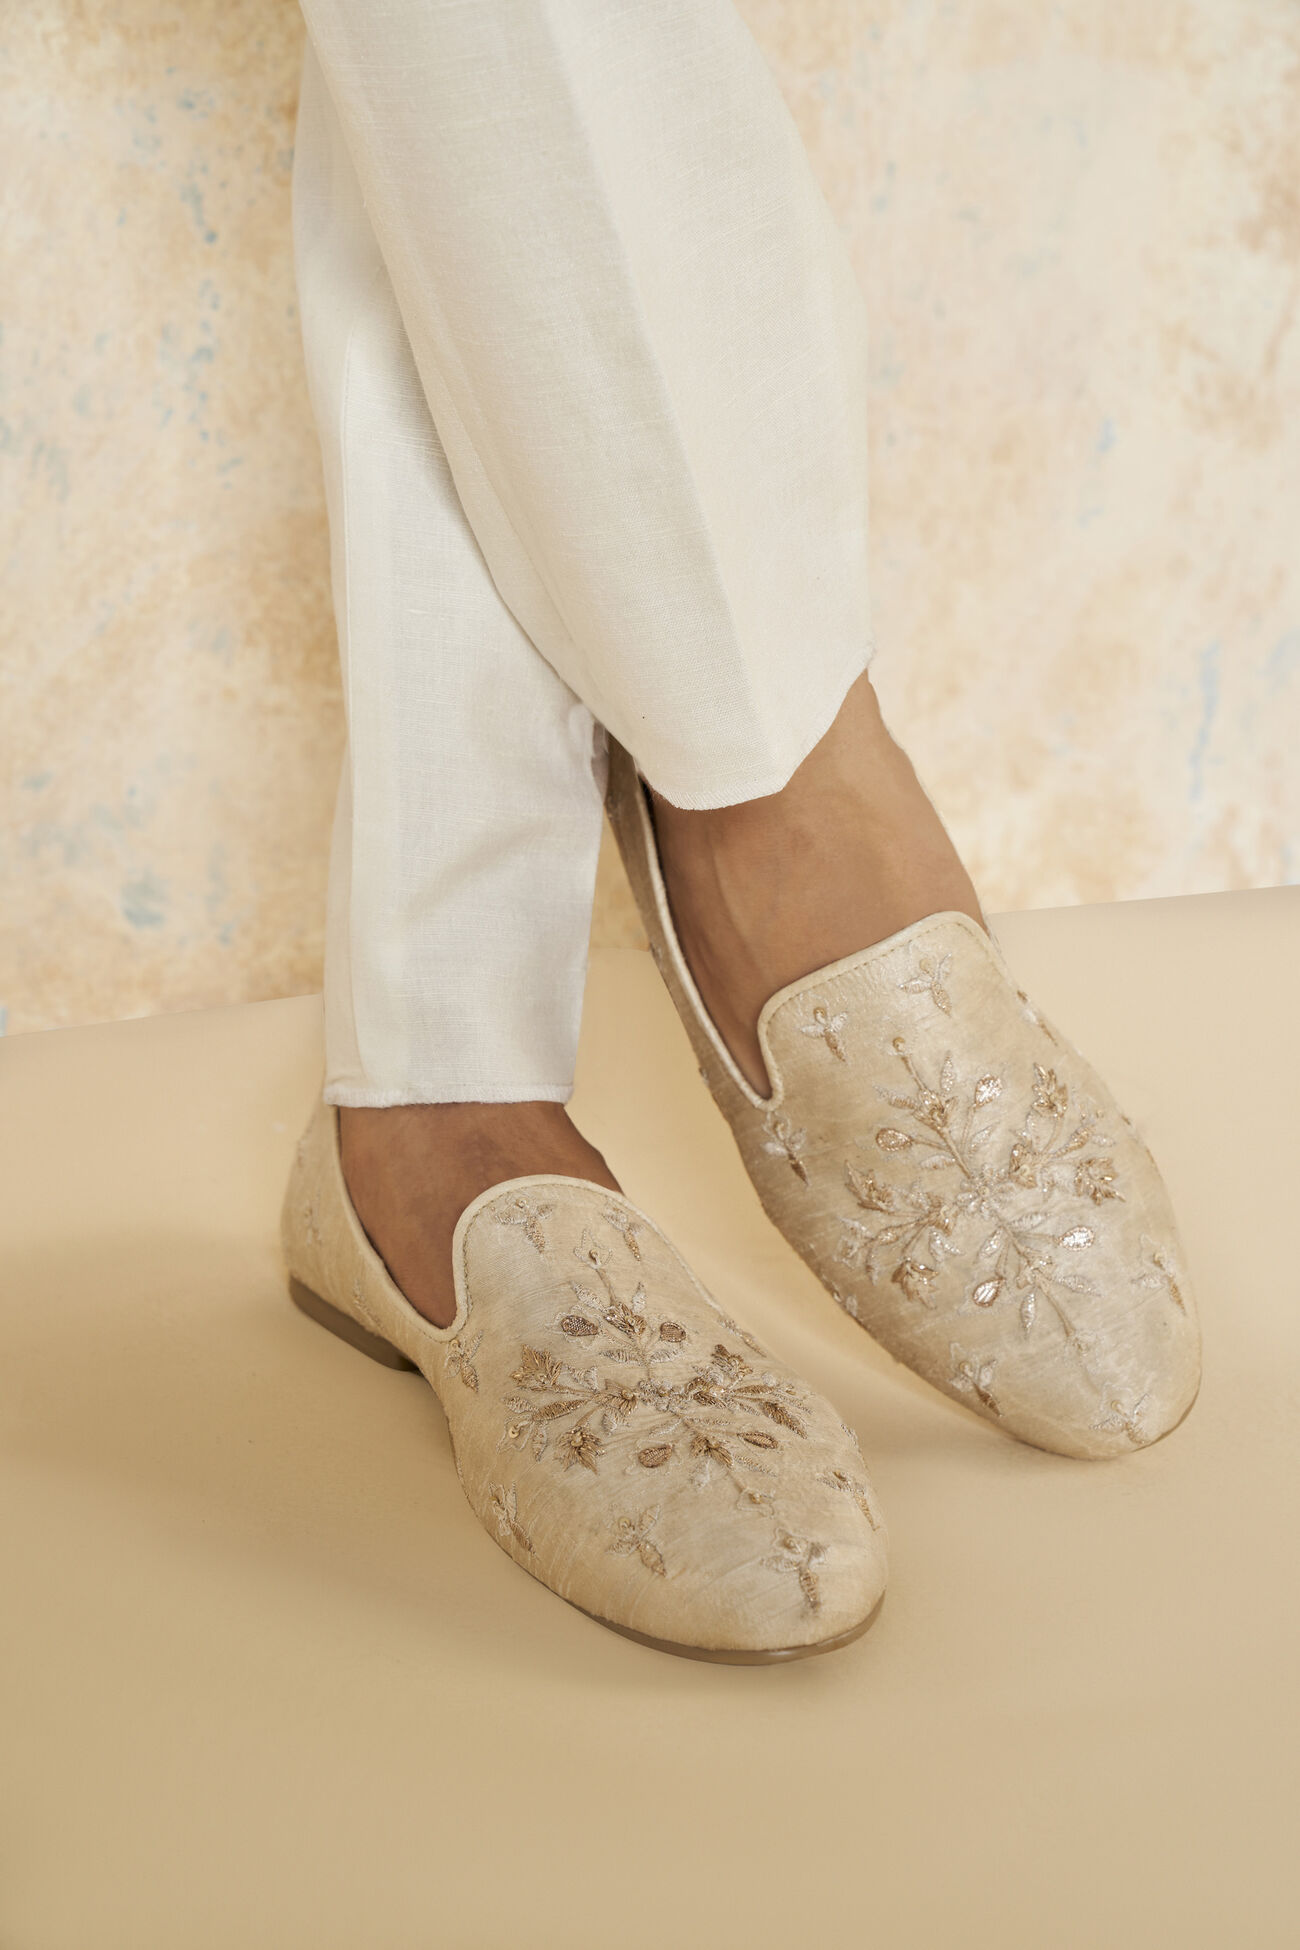 Arhat Embroidered Silk Shoes - Ivory, Ivory, image 1